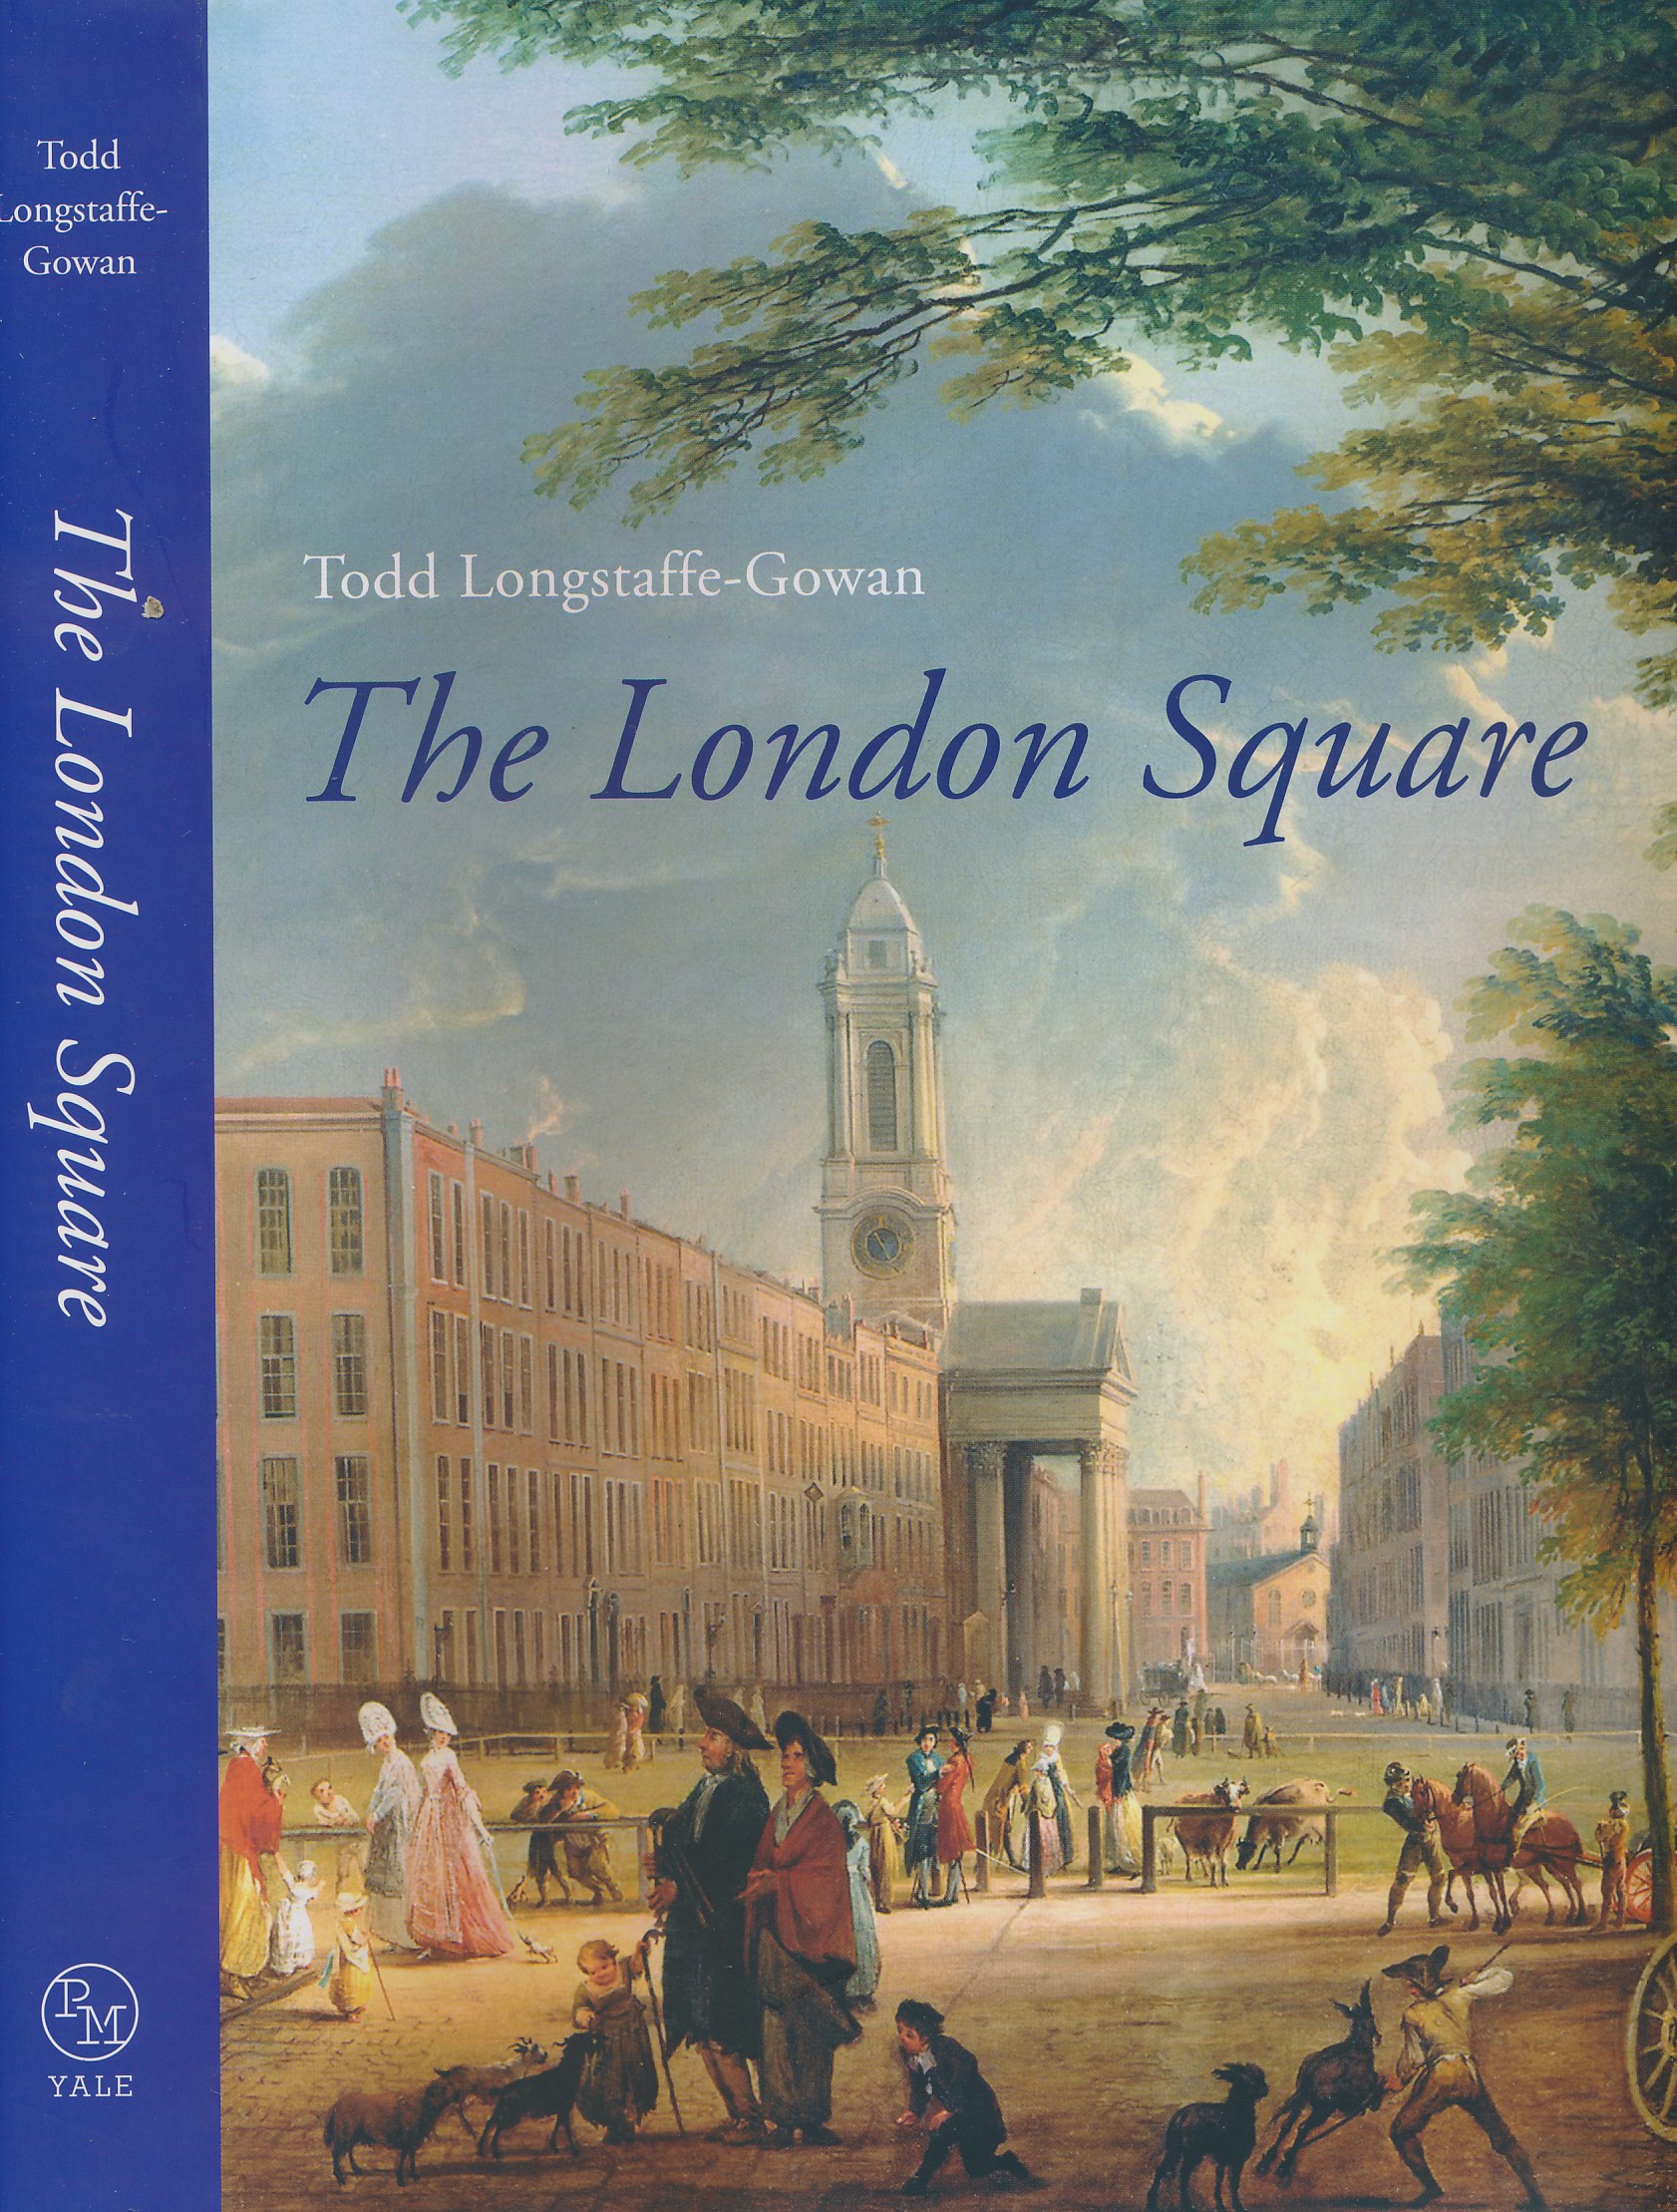 The London Square. Gardens in the Midst of Town